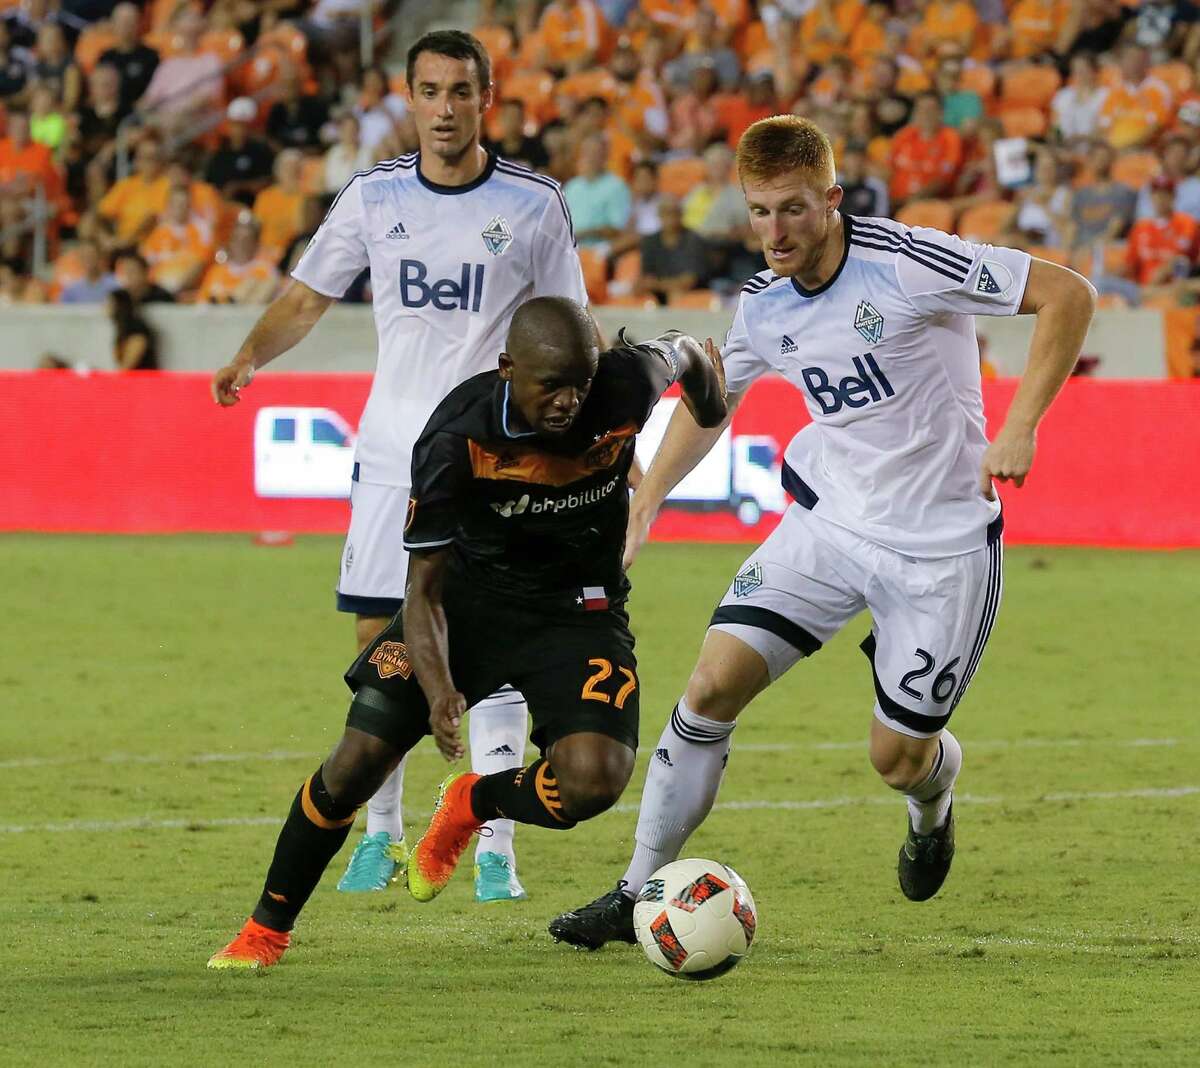 Houston Dynamo midfielder Oscar Garcia (27) dribbles around Vancouver Whitecaps defender Tim Parker (26) during the second half during an MLS soccer match Saturday, July 23, 2016, in Houston. Houston and Vancouver played to scoreless draw. (AP Photo/Bob Levey)